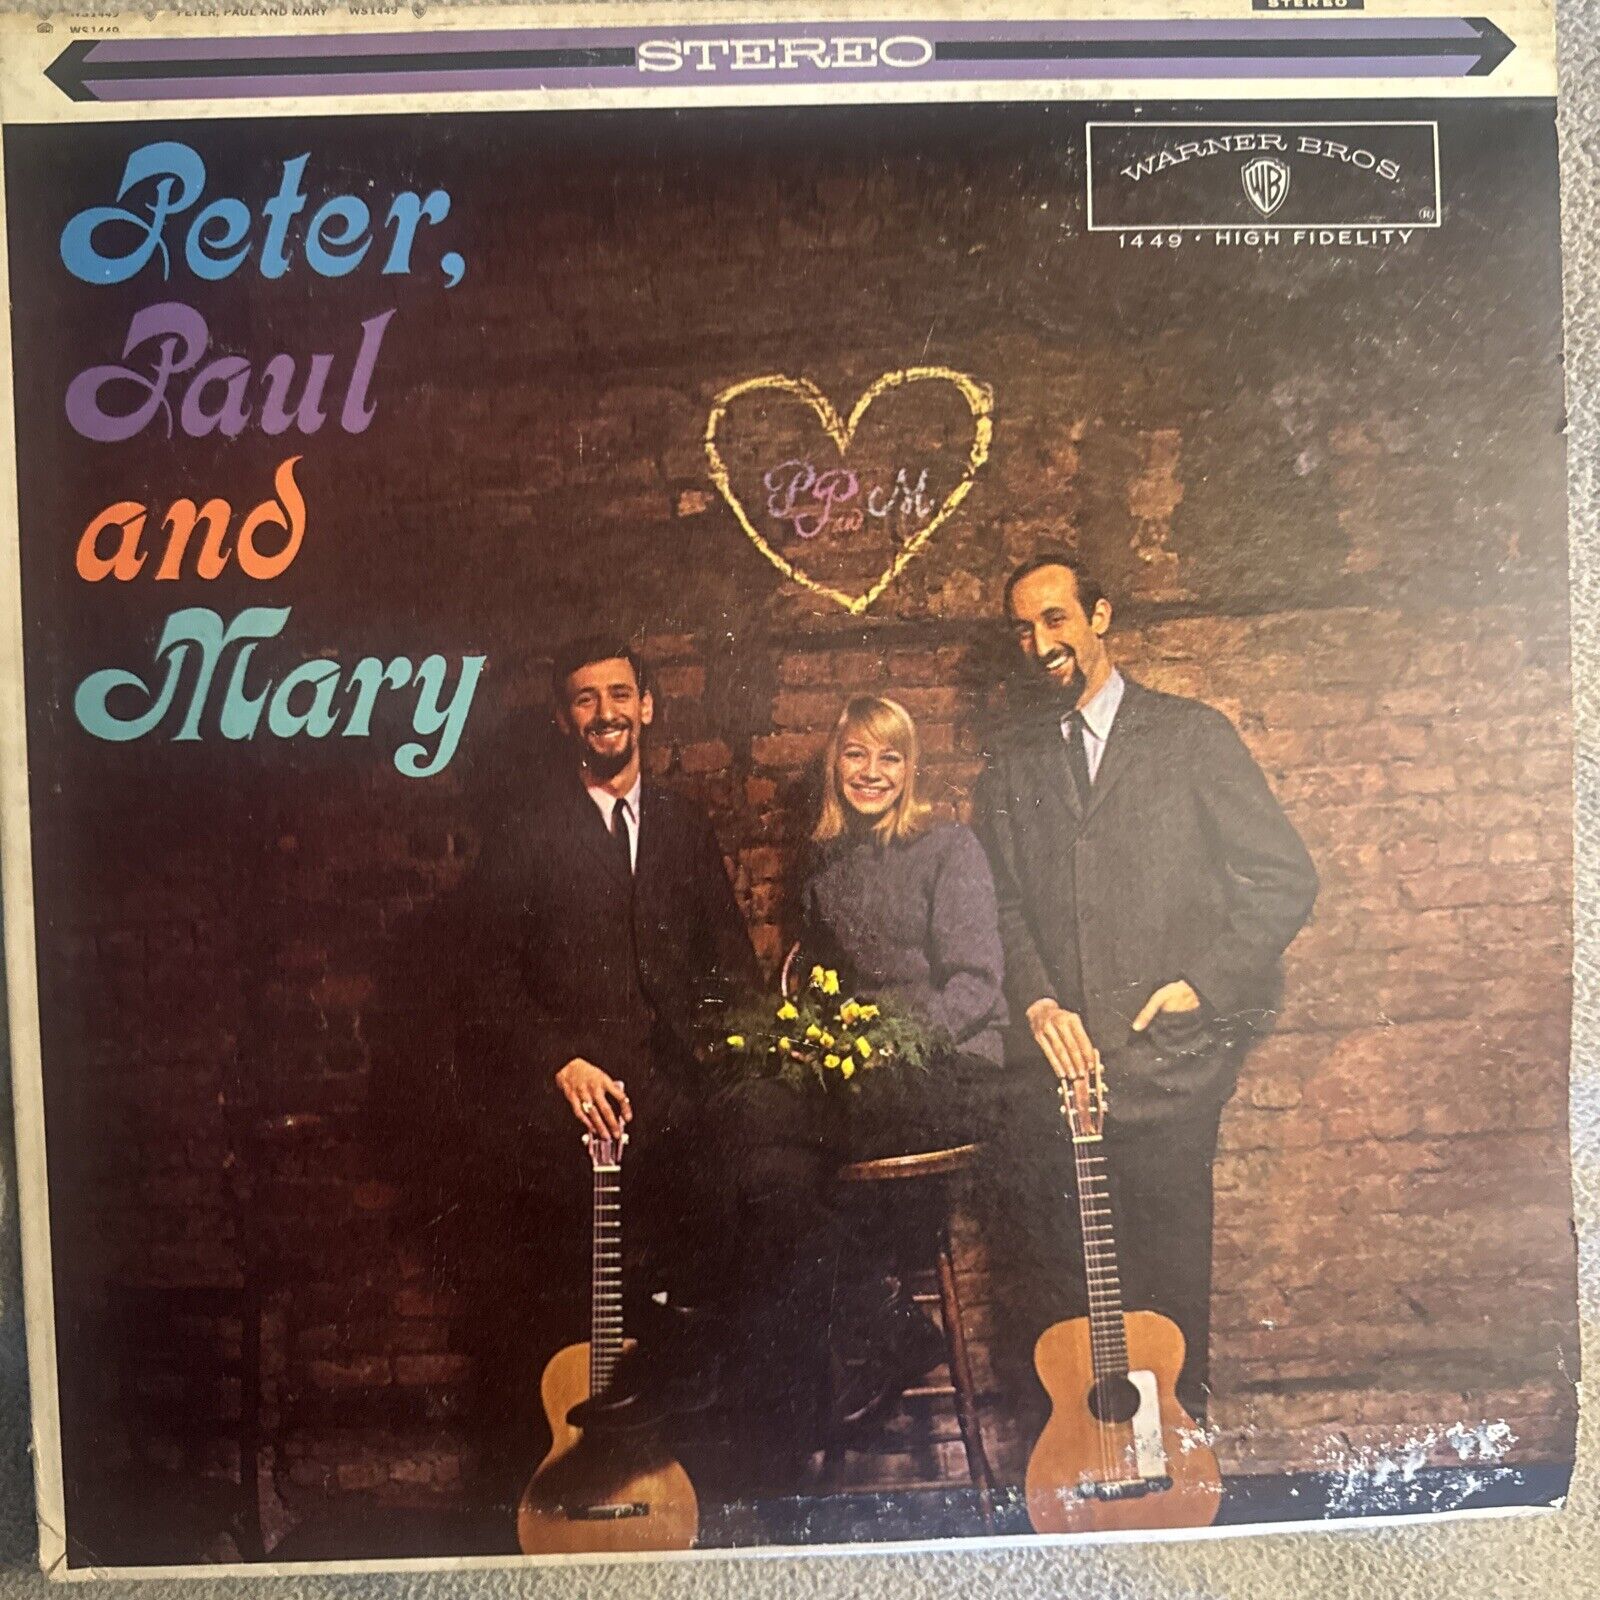 Peter Paul And Mary Self-Titled Vinyl LP Warner Bros. Records W 1449 1962 LP